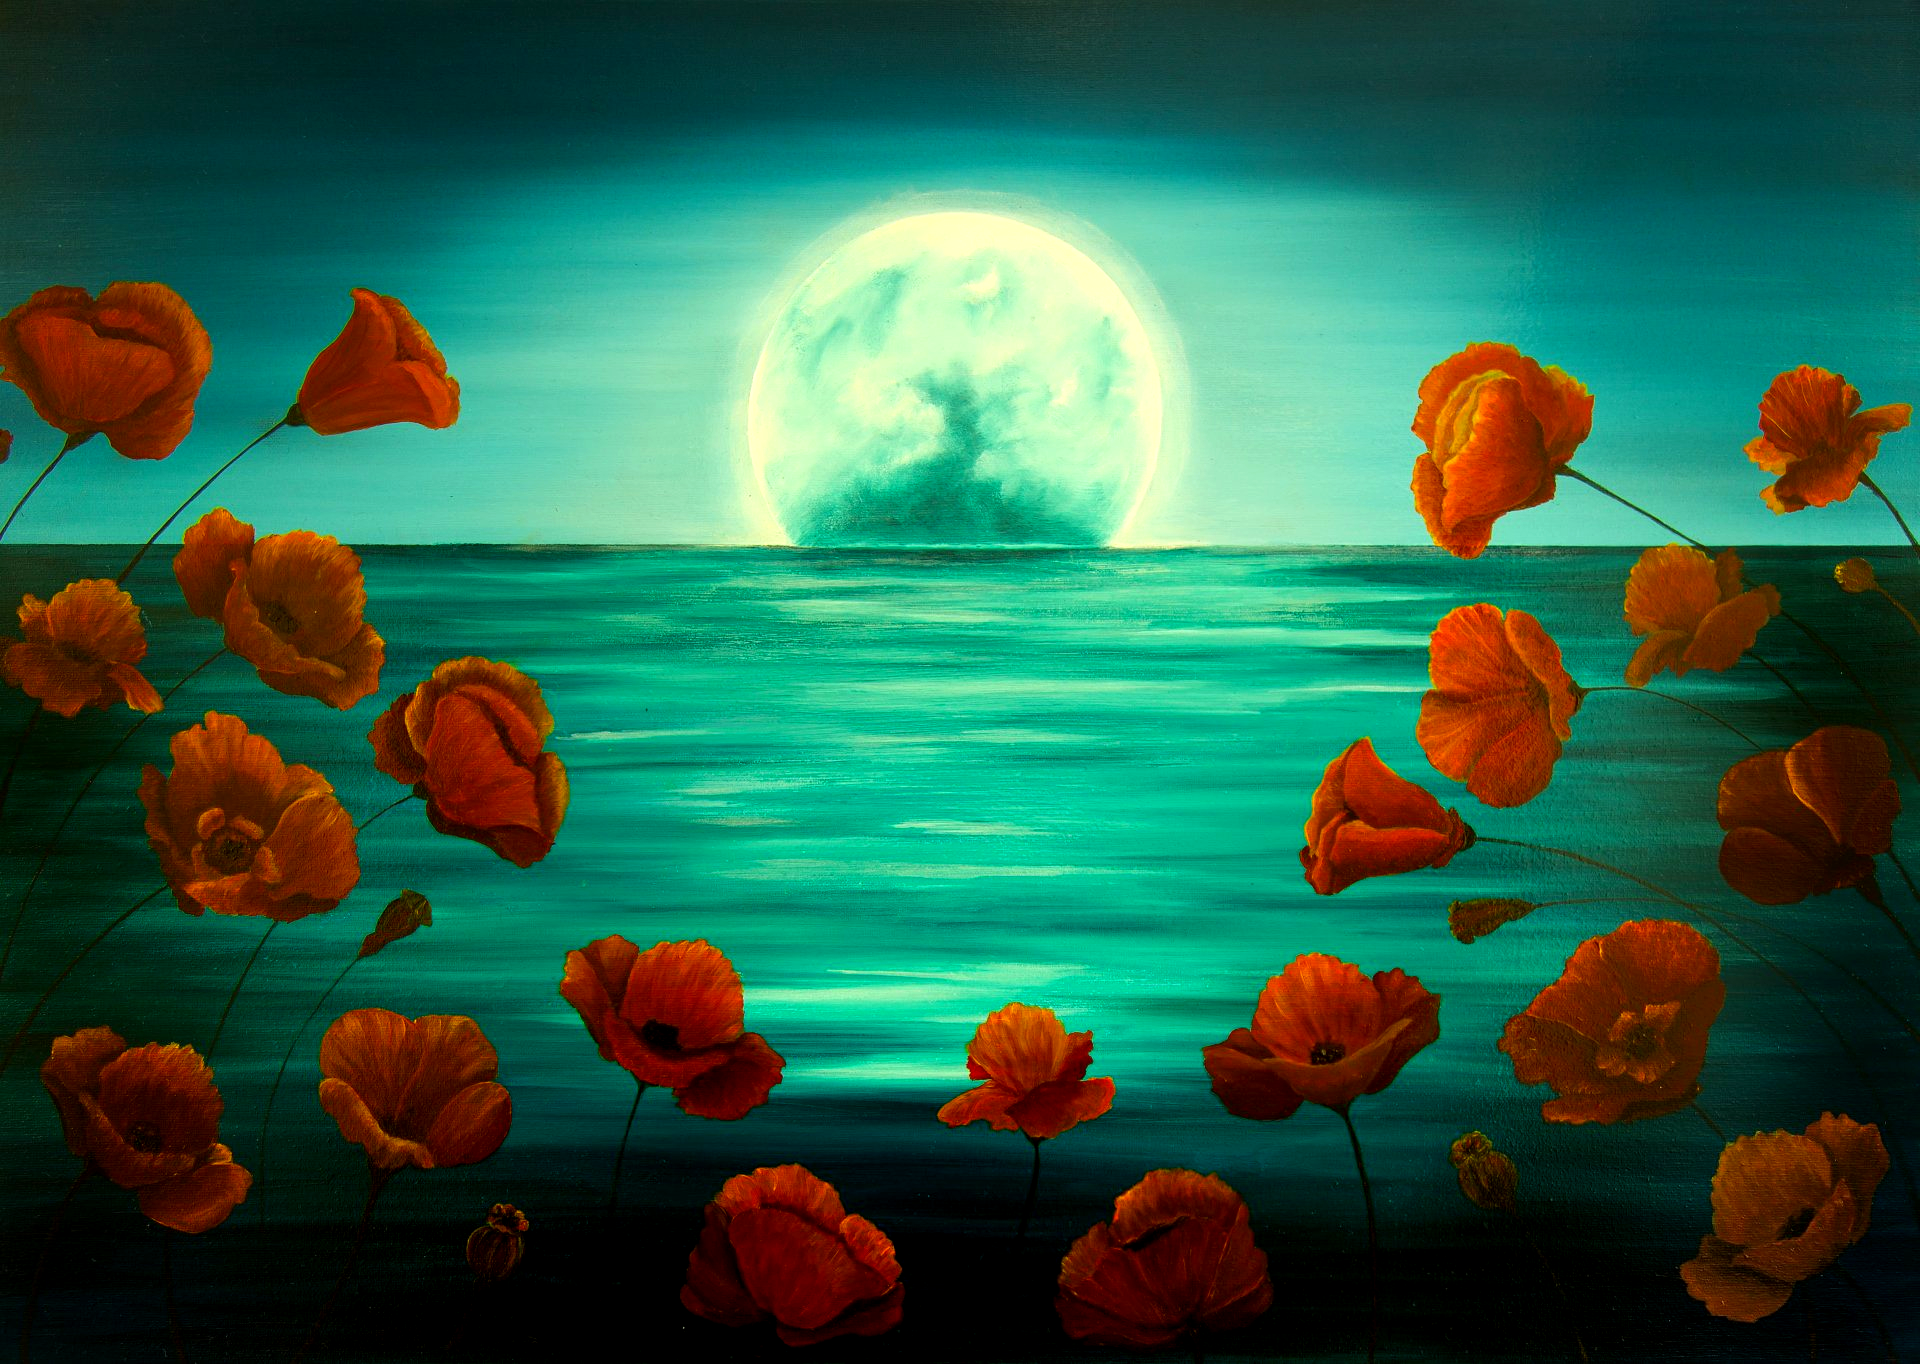 Poppies in the Moonlight, giclee print from oil painting, limited edition